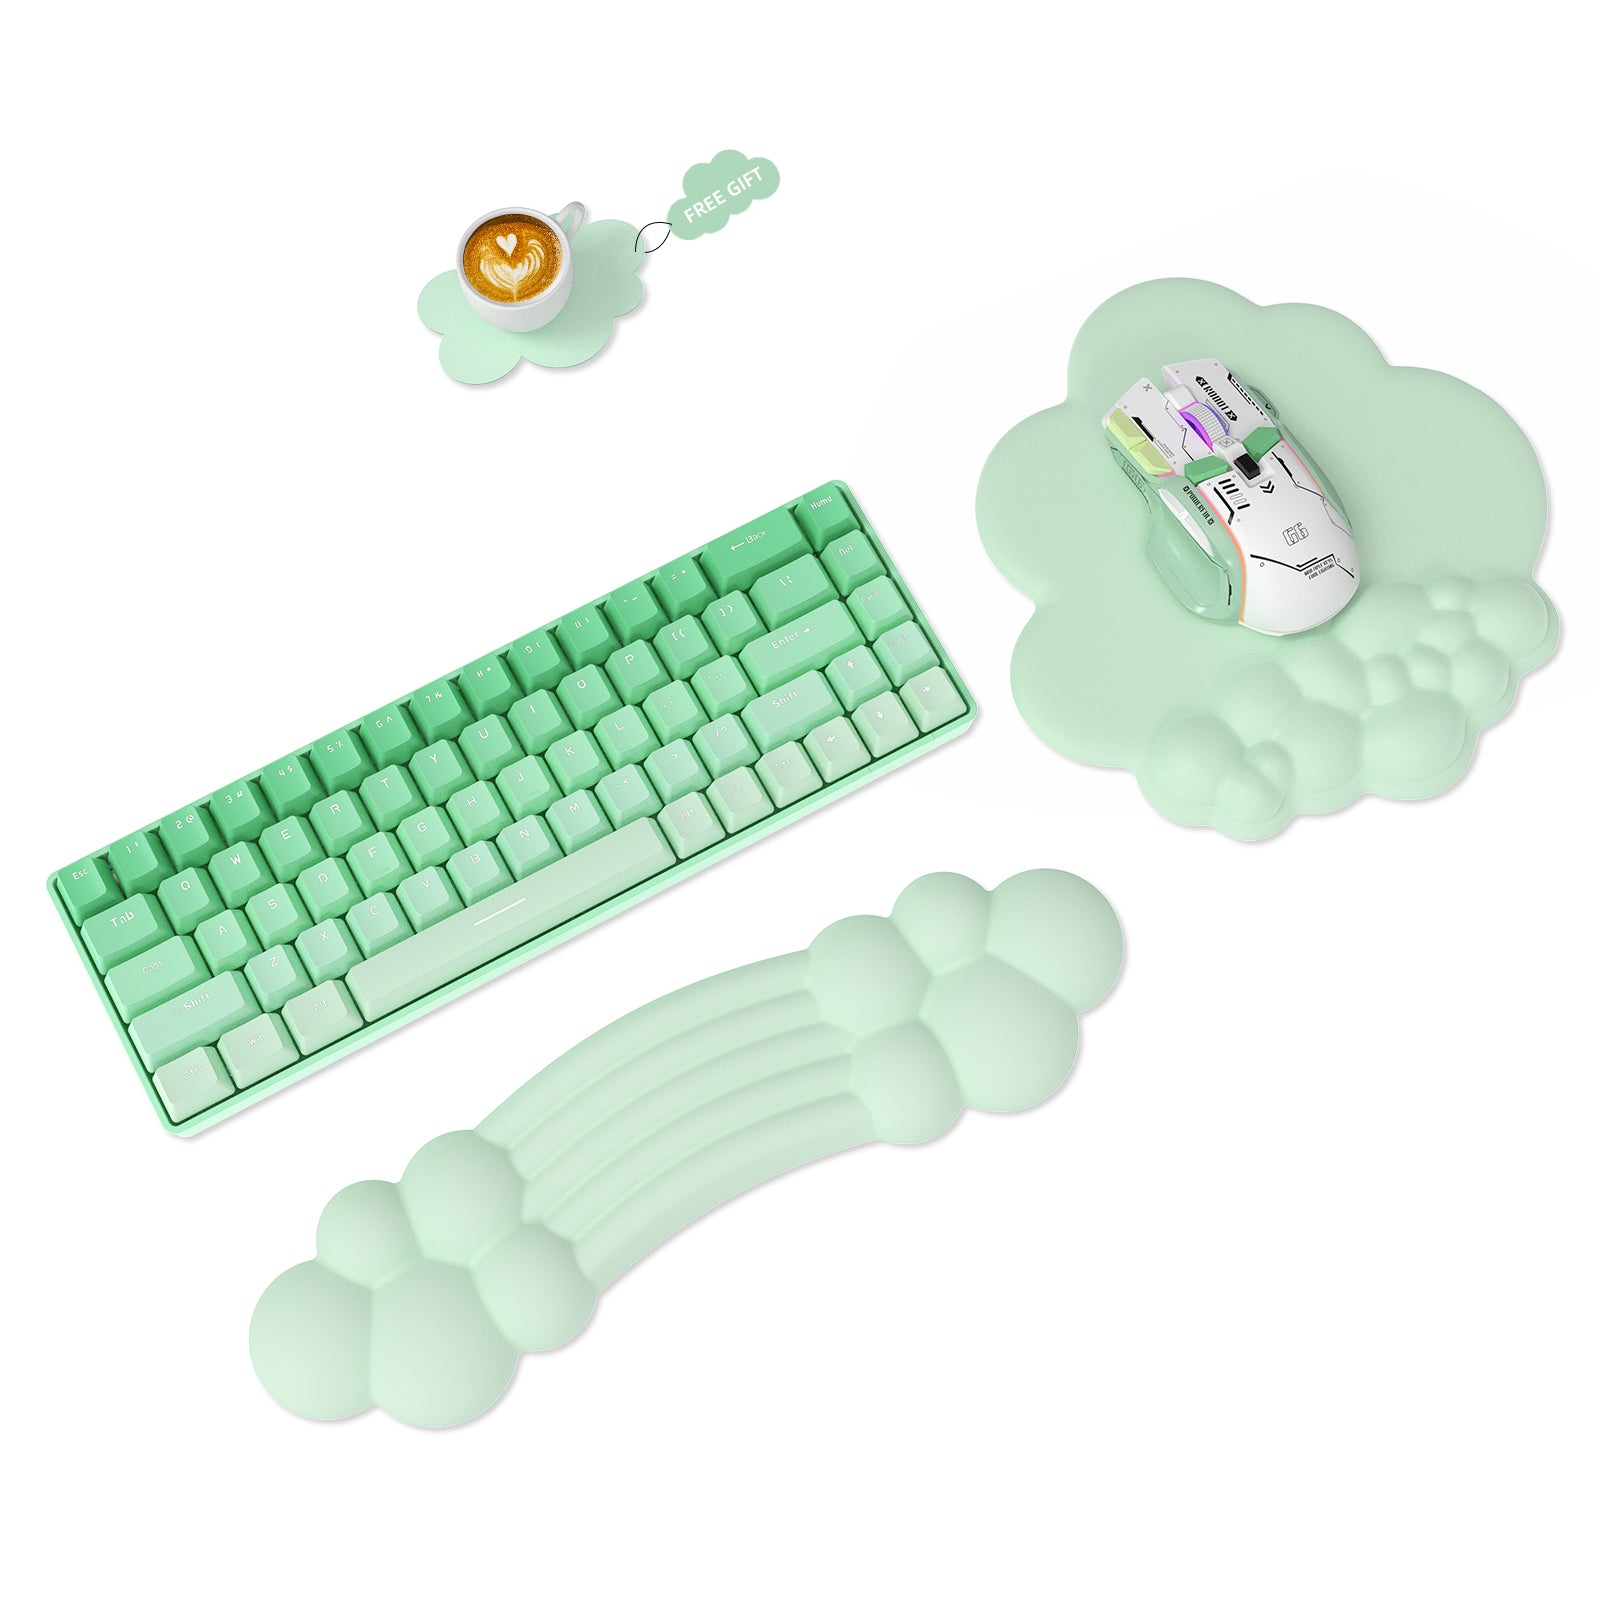 MAMBASNAKE Rainbow Cloud Wrist Rest Combo, Mouse Wrist Support for Ergonomic Pain Relief,Cute Desk Accessory for Home Office